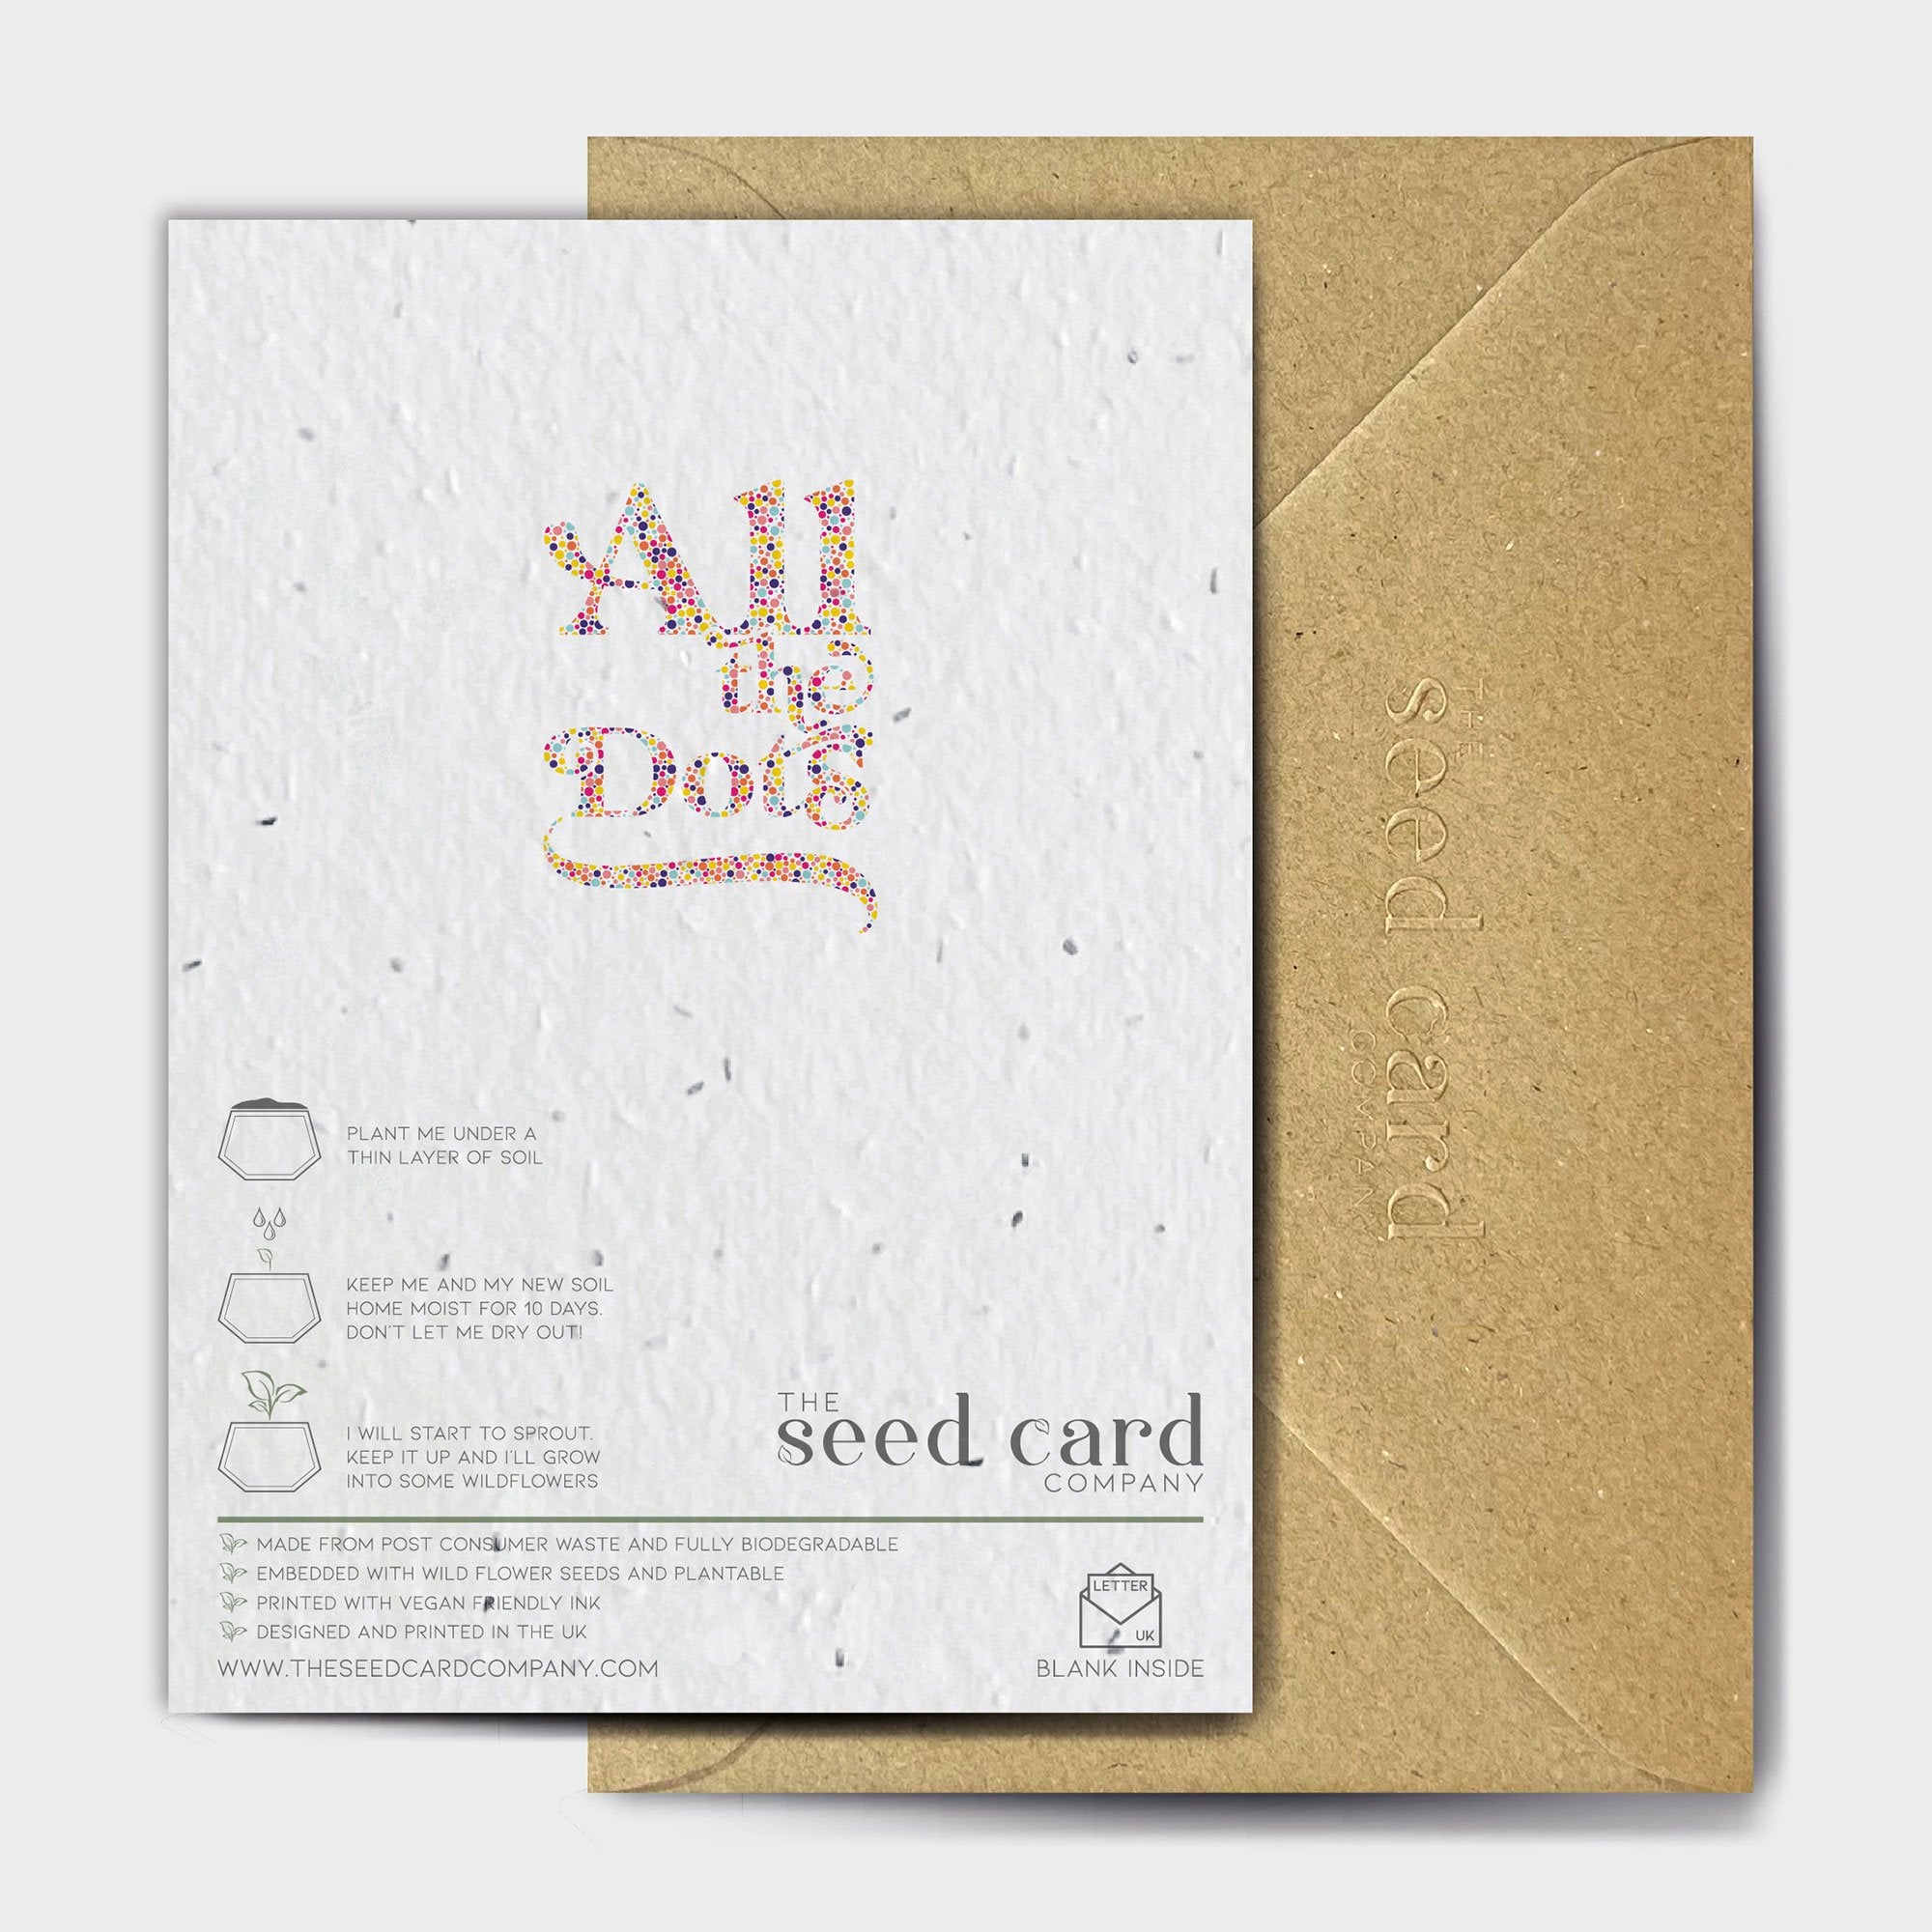 Shop online Condotulations! - 100% biodegradable seed-embedded cards Shop -The Seed Card Company